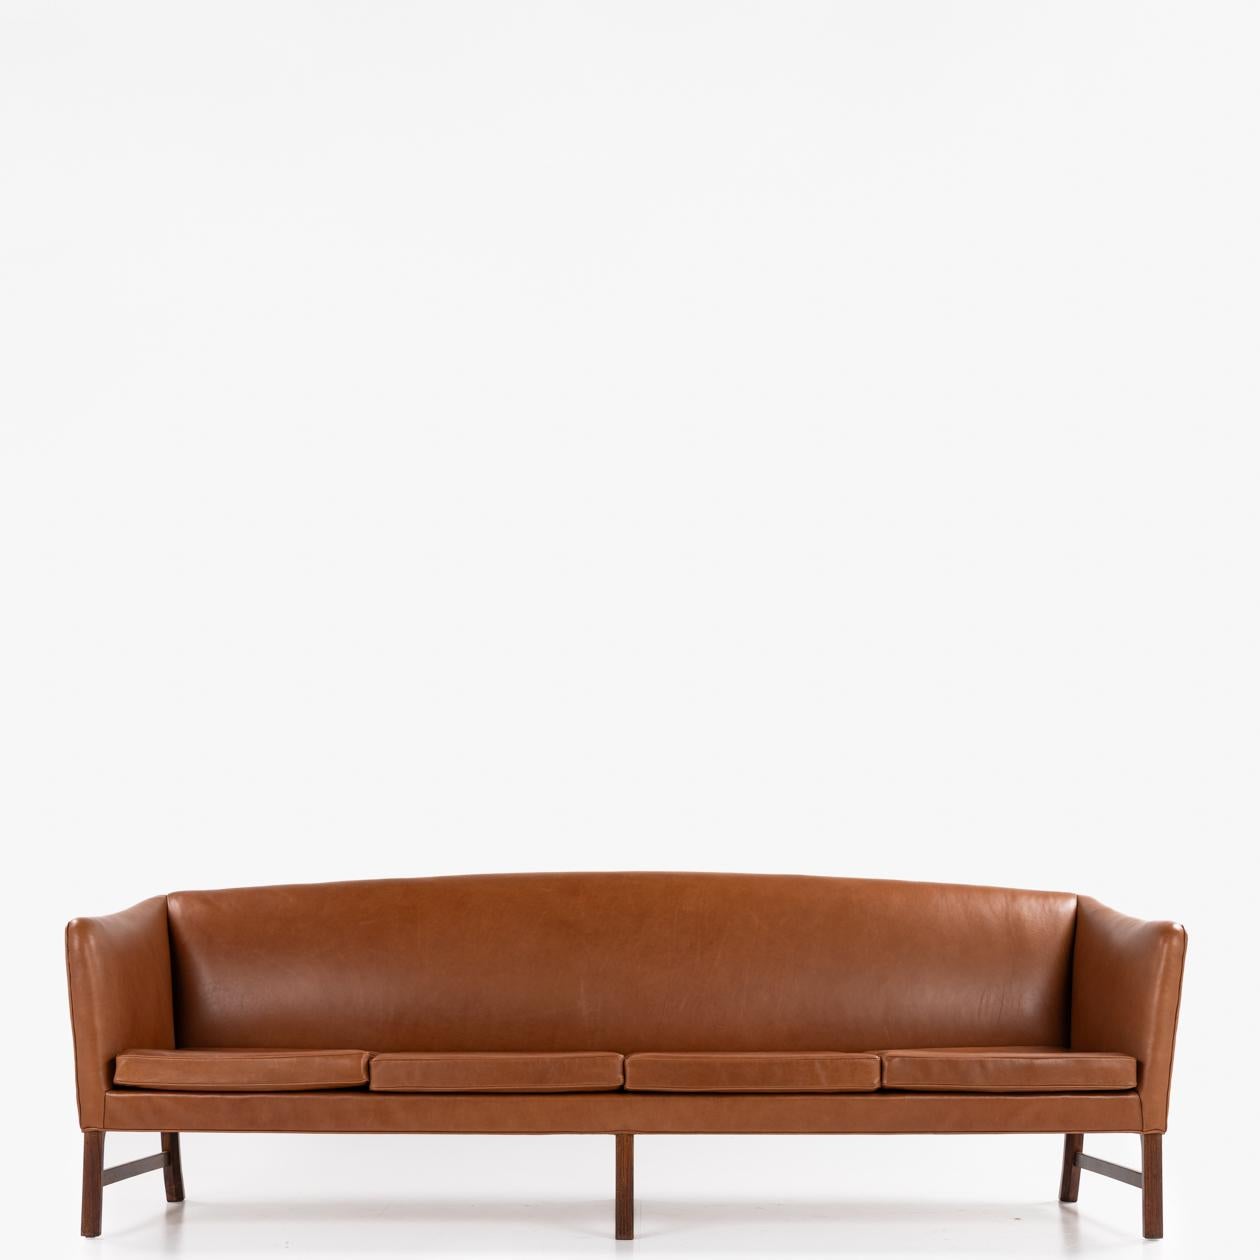 Reupholstered 4-seater sofa by Ole Wanscher In Good Condition For Sale In Copenhagen, DK